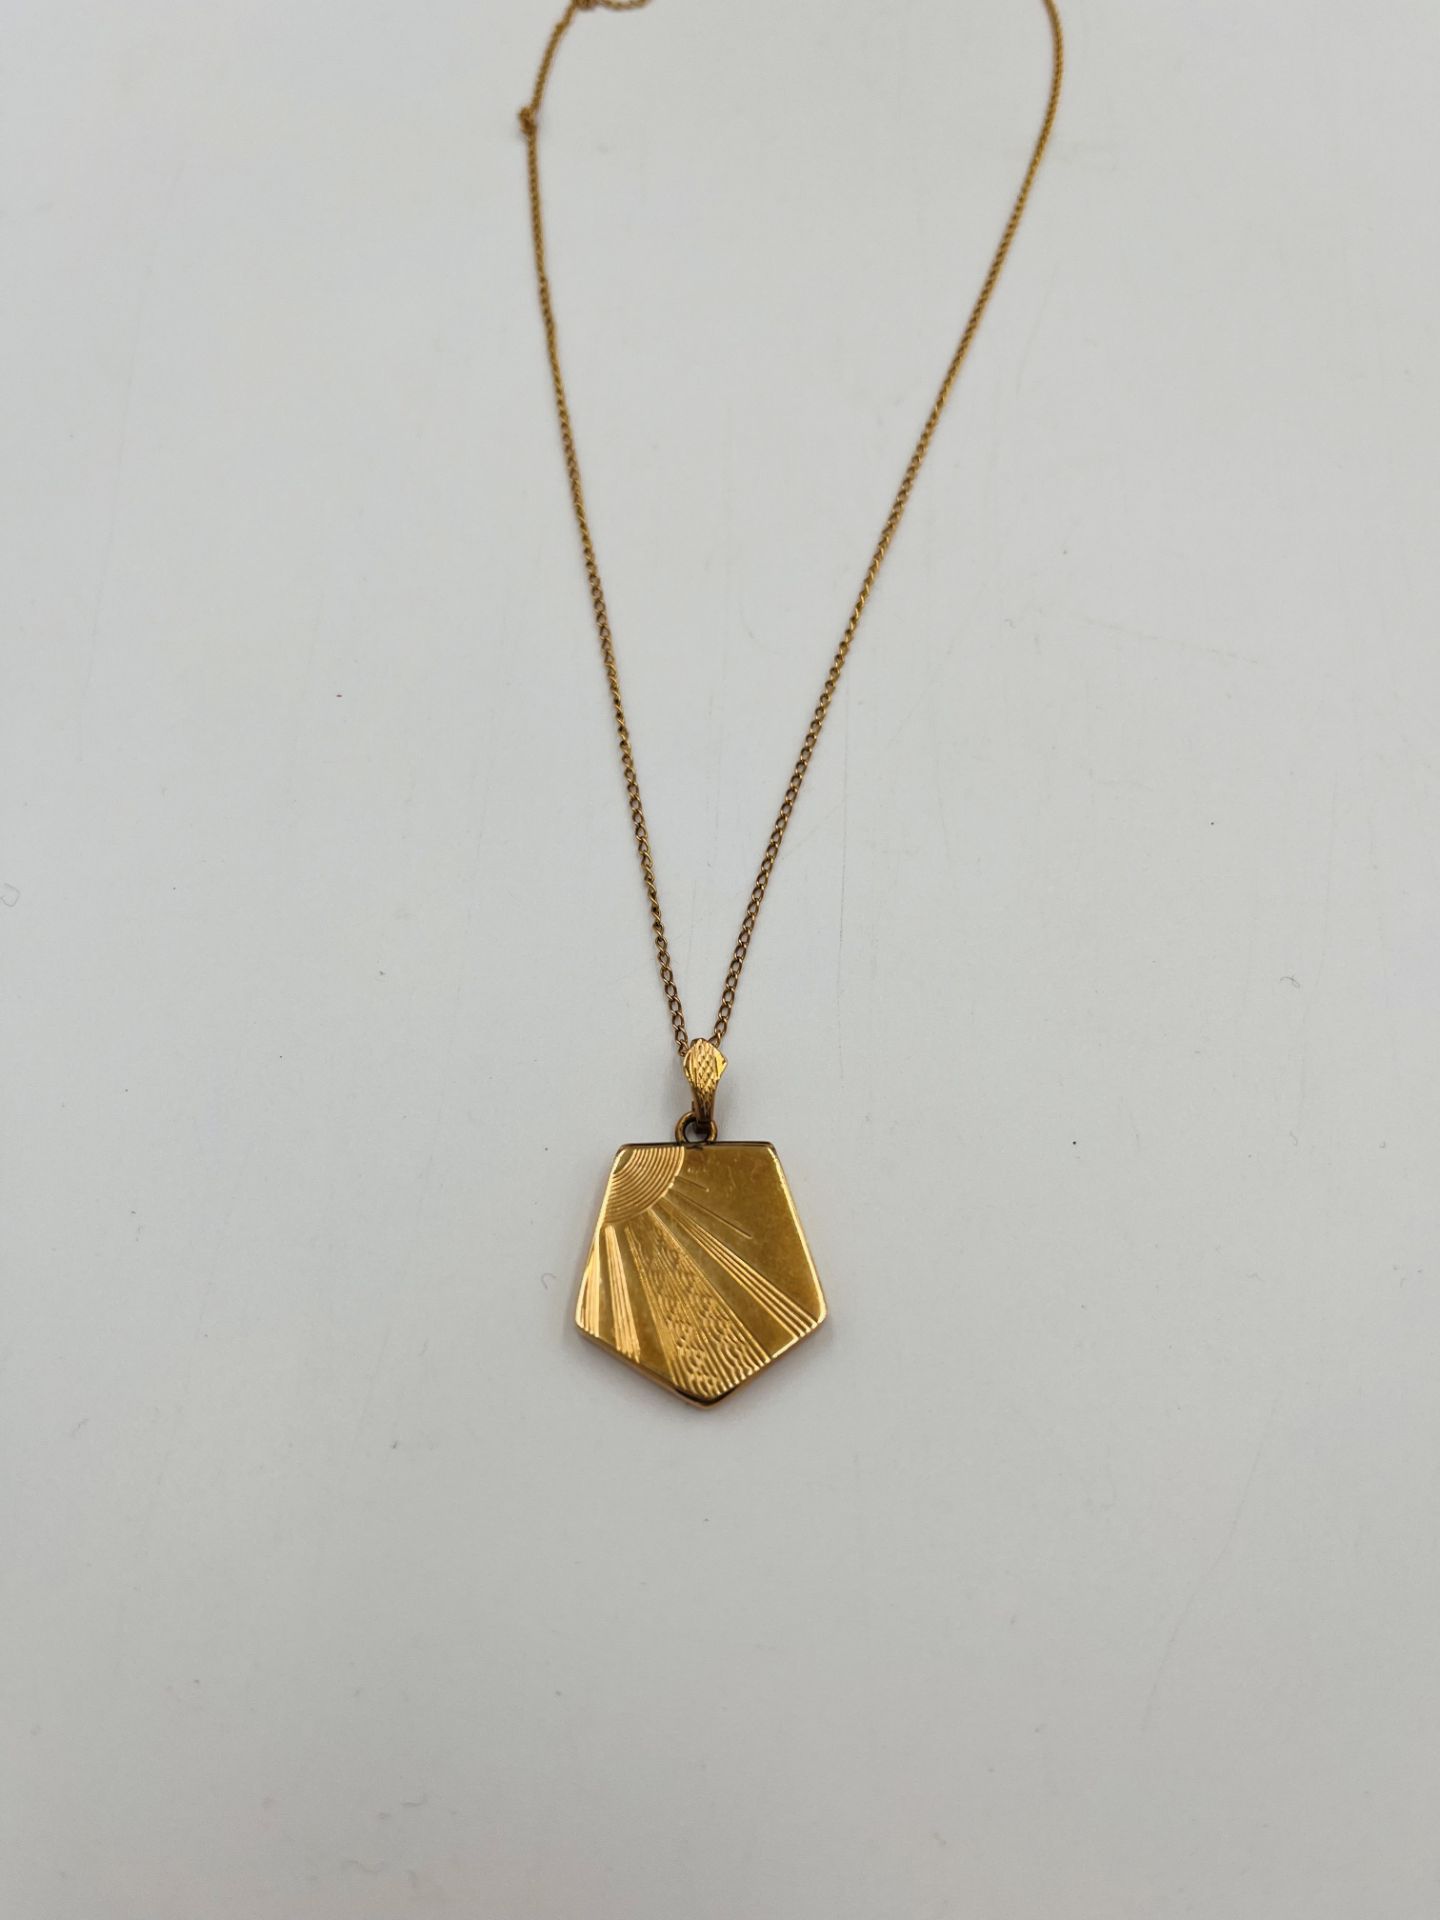 9ct gold locket on 9ct gold chain - Image 6 of 6